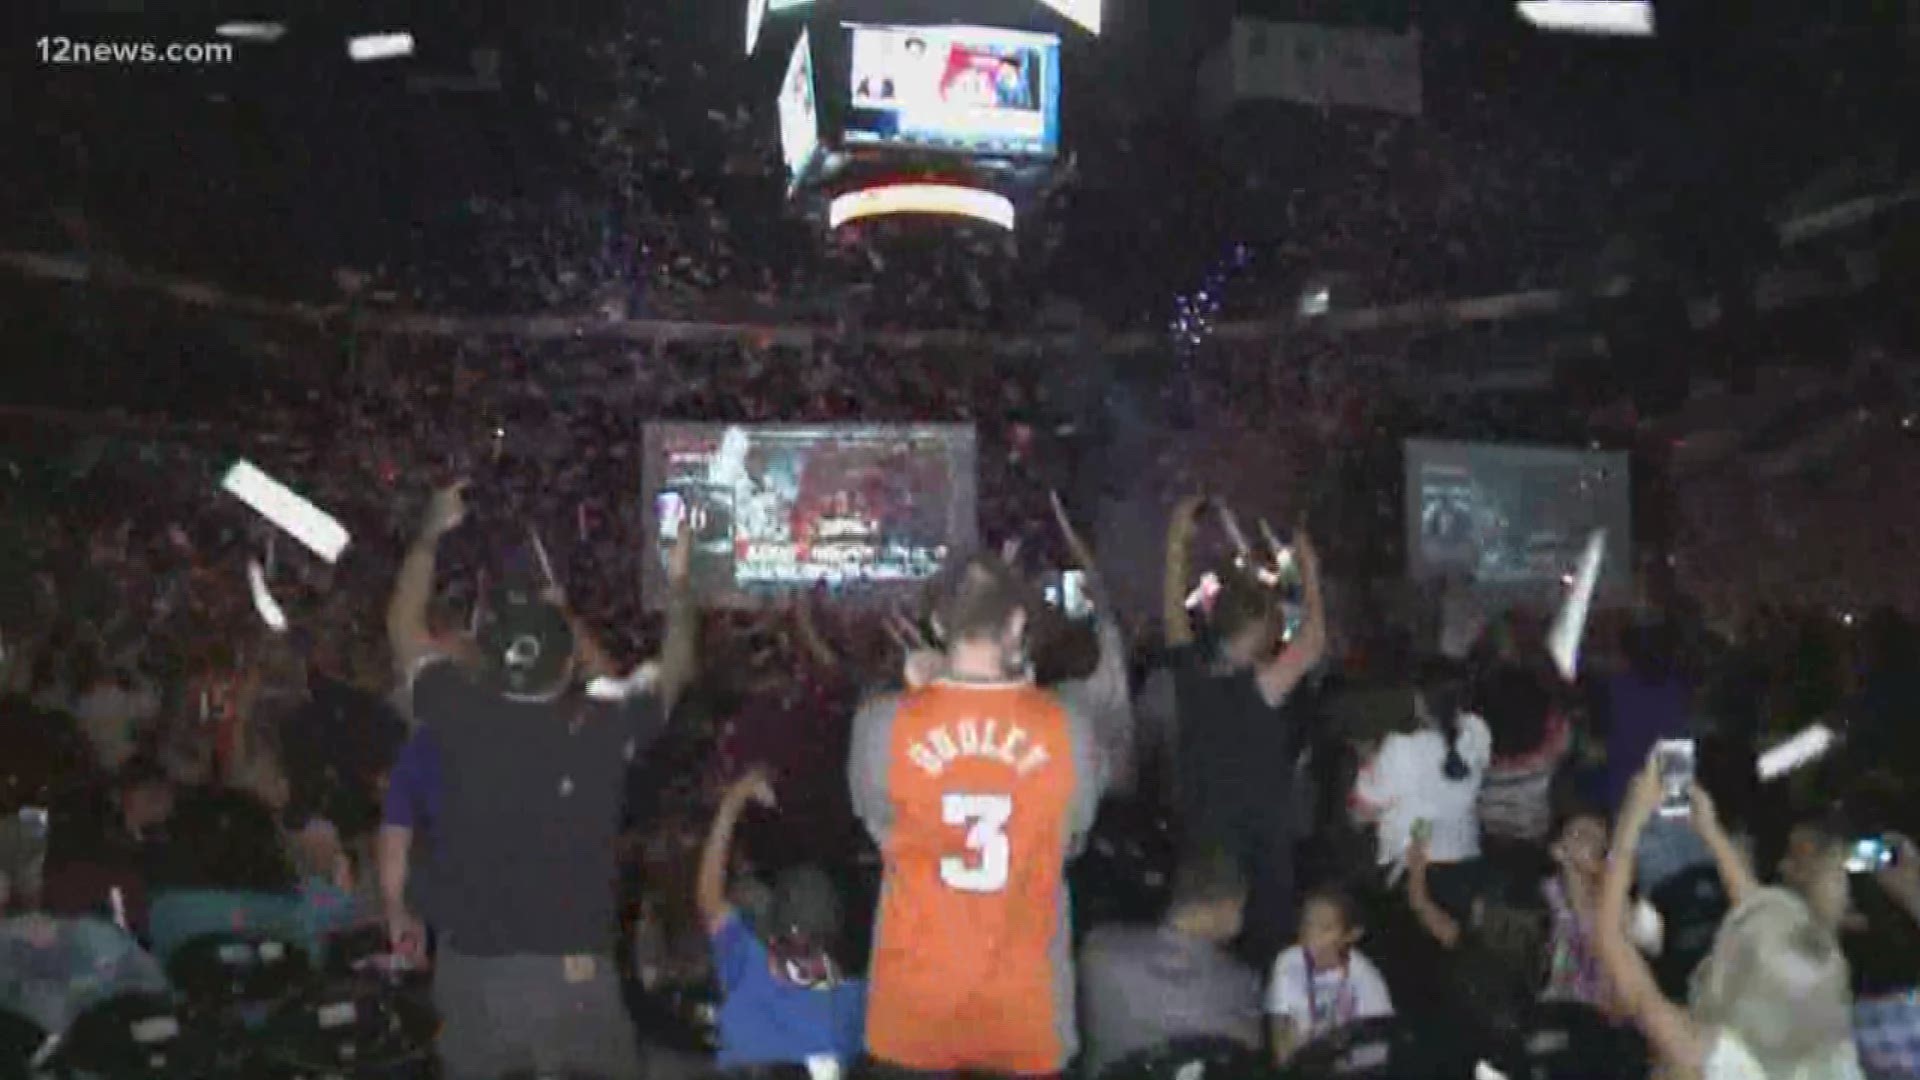 Suns fans were nervous with anticipation as they watched the NBA draft lottery from Talking Stick Arena.